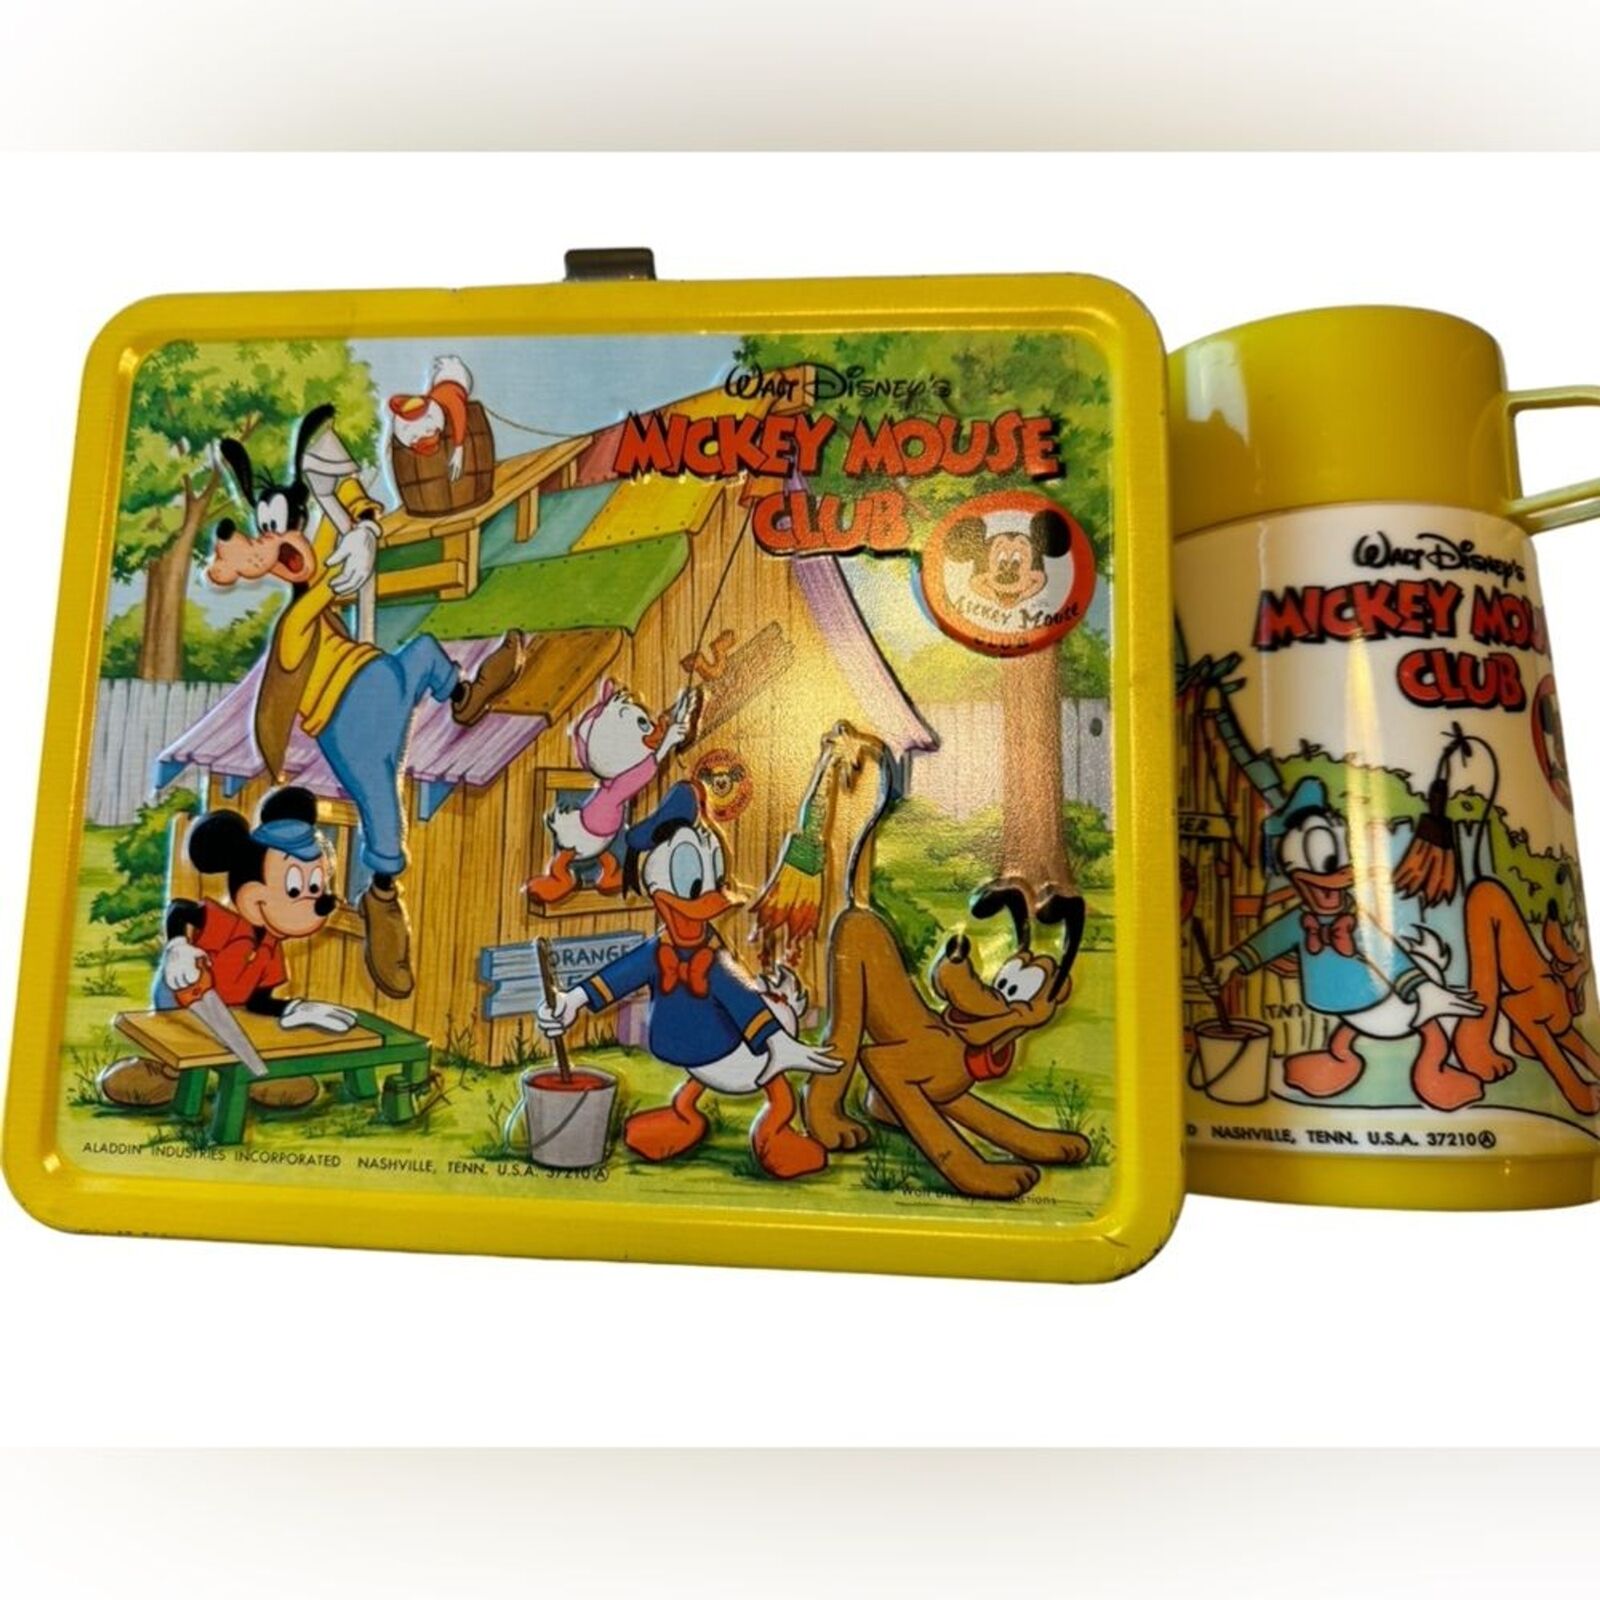 Vintage 1976 Mickey Mouse Club Metal Lunchbox & Thermos Set MINTY